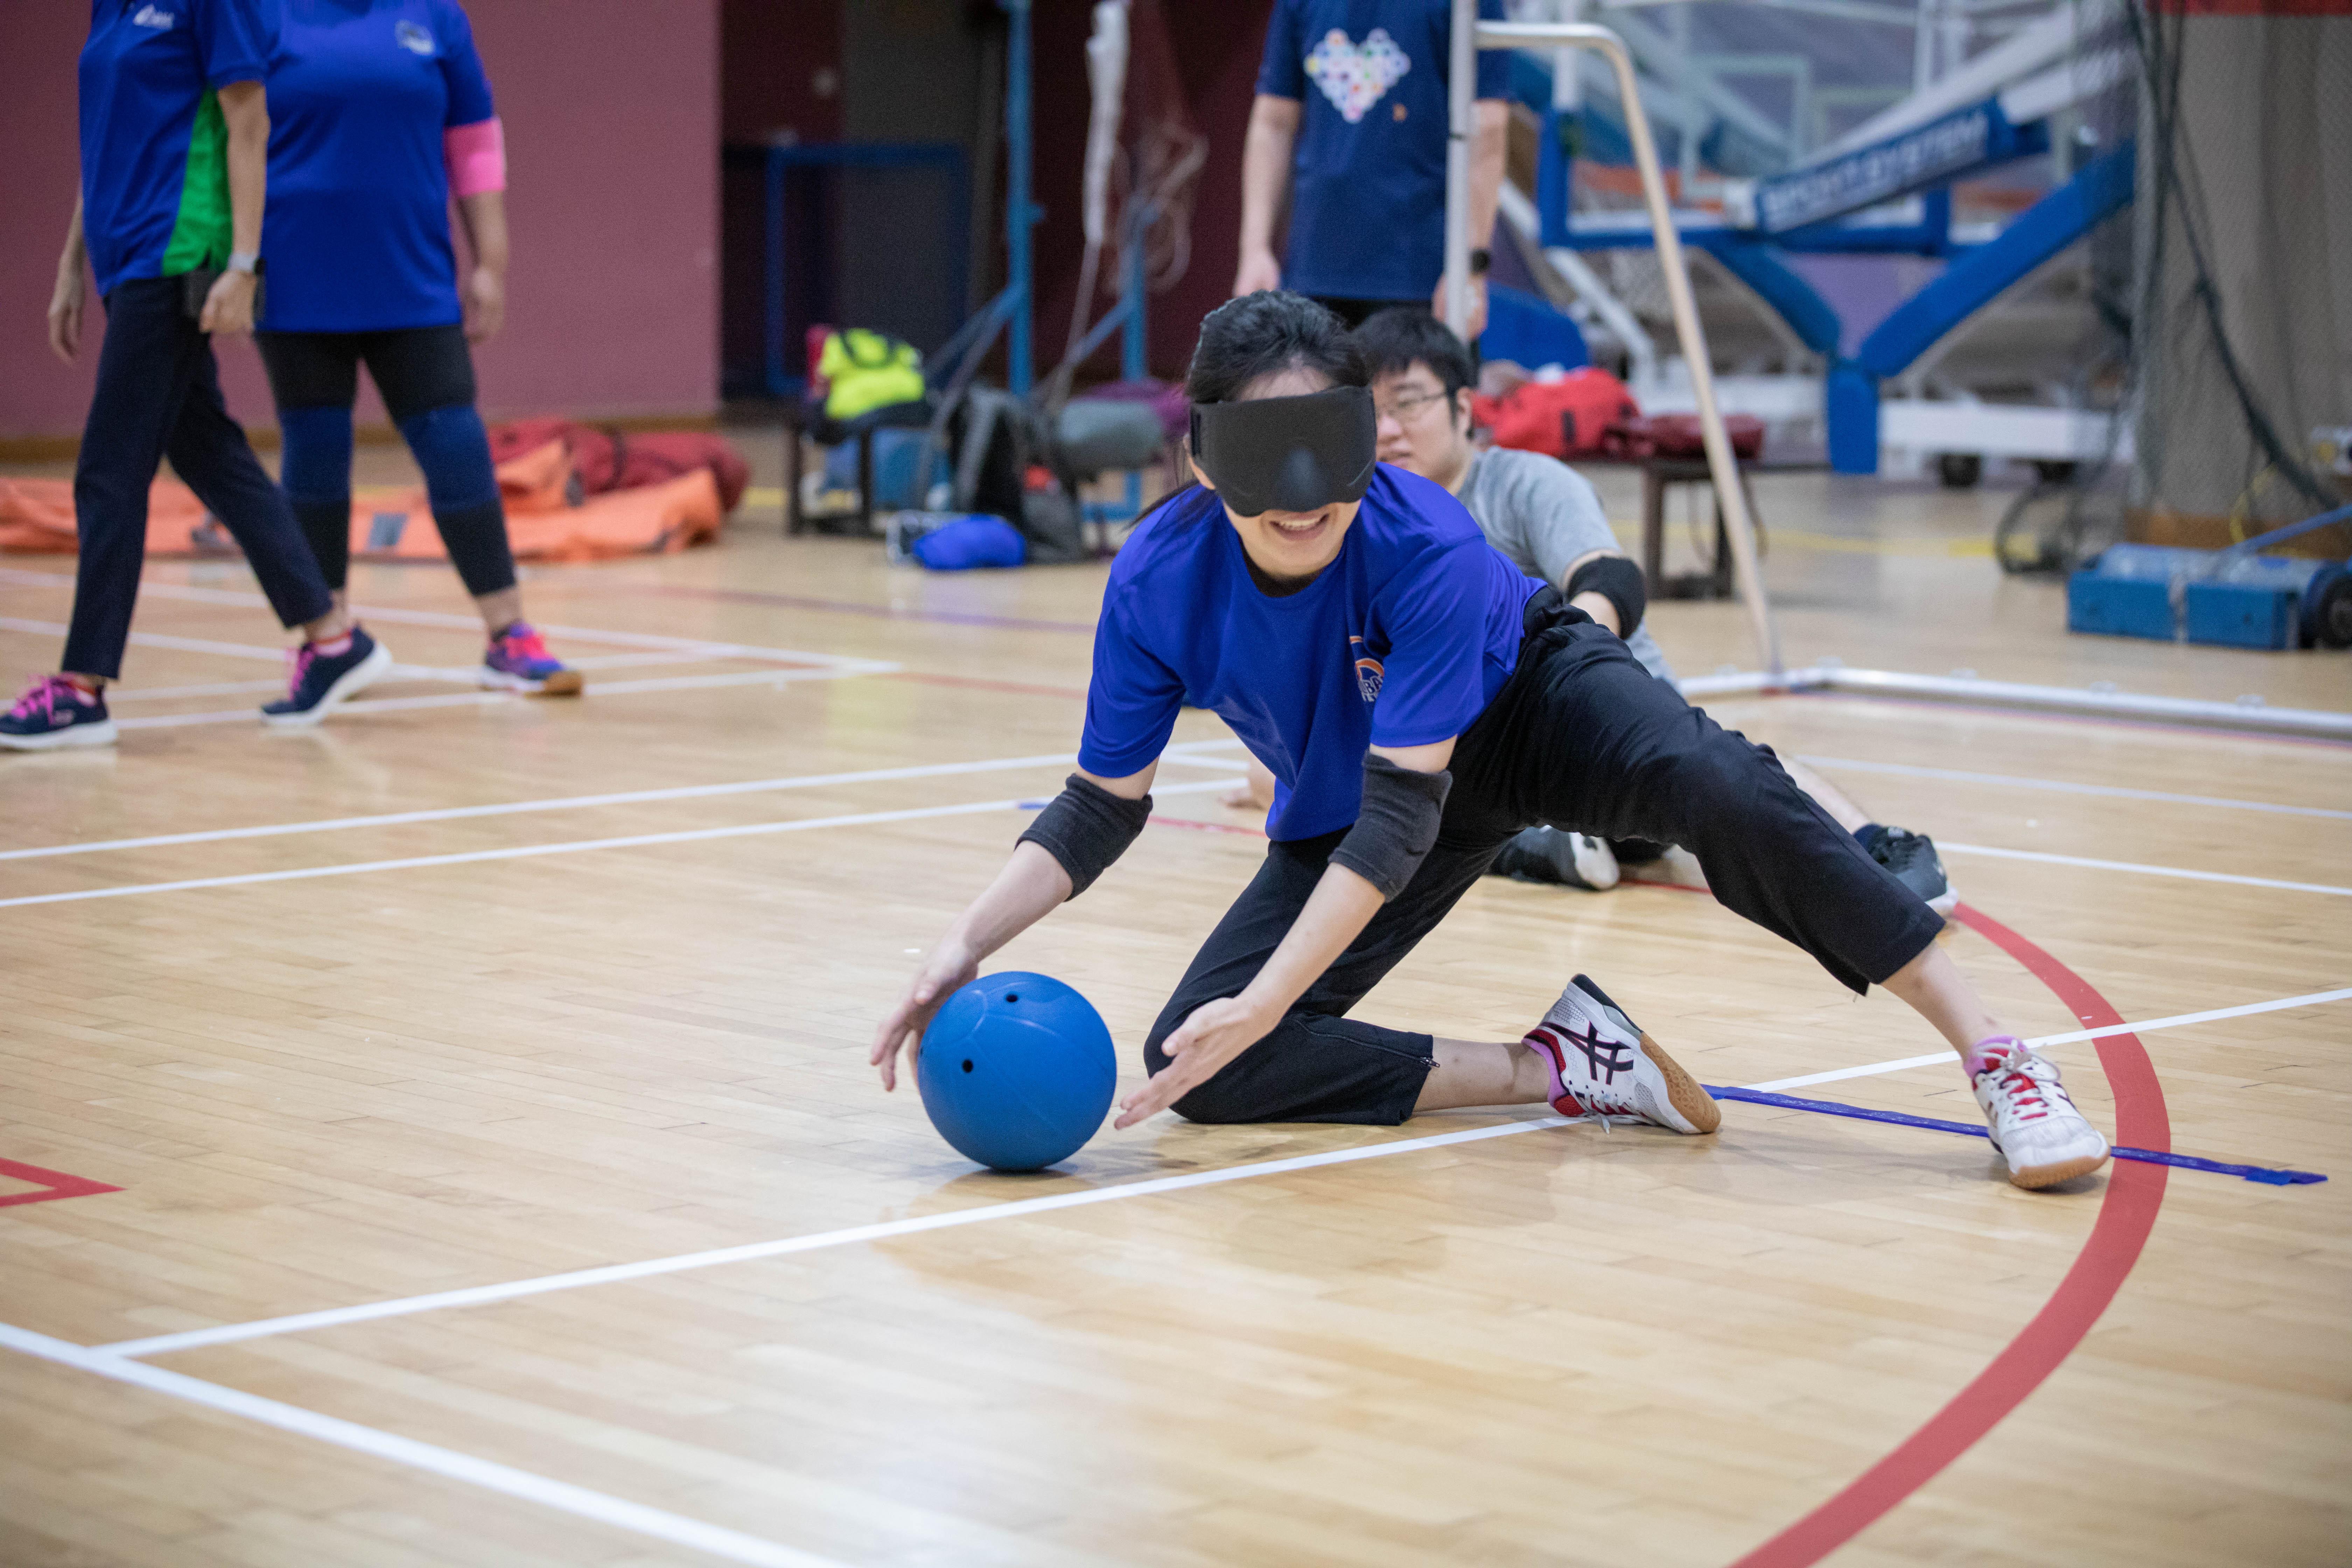 Wide shot of a lady trying out para sports with a blindfold on